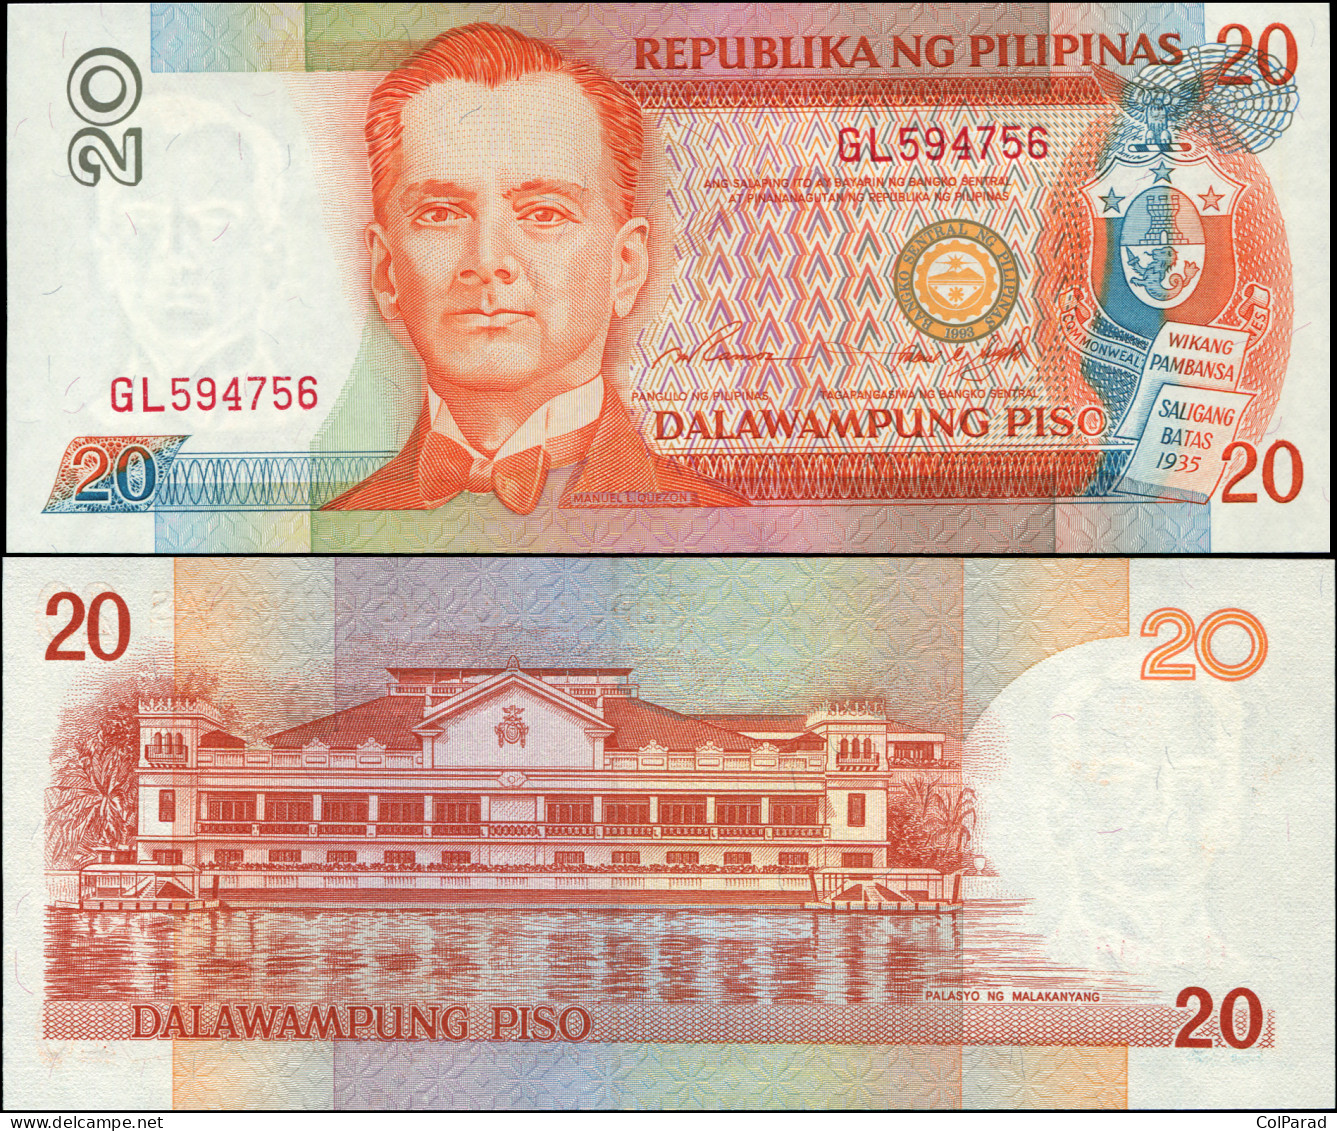 PHILIPPINES 20 PISO - ND (1997) - Paper Unc - P.182a Banknote - Philippinen